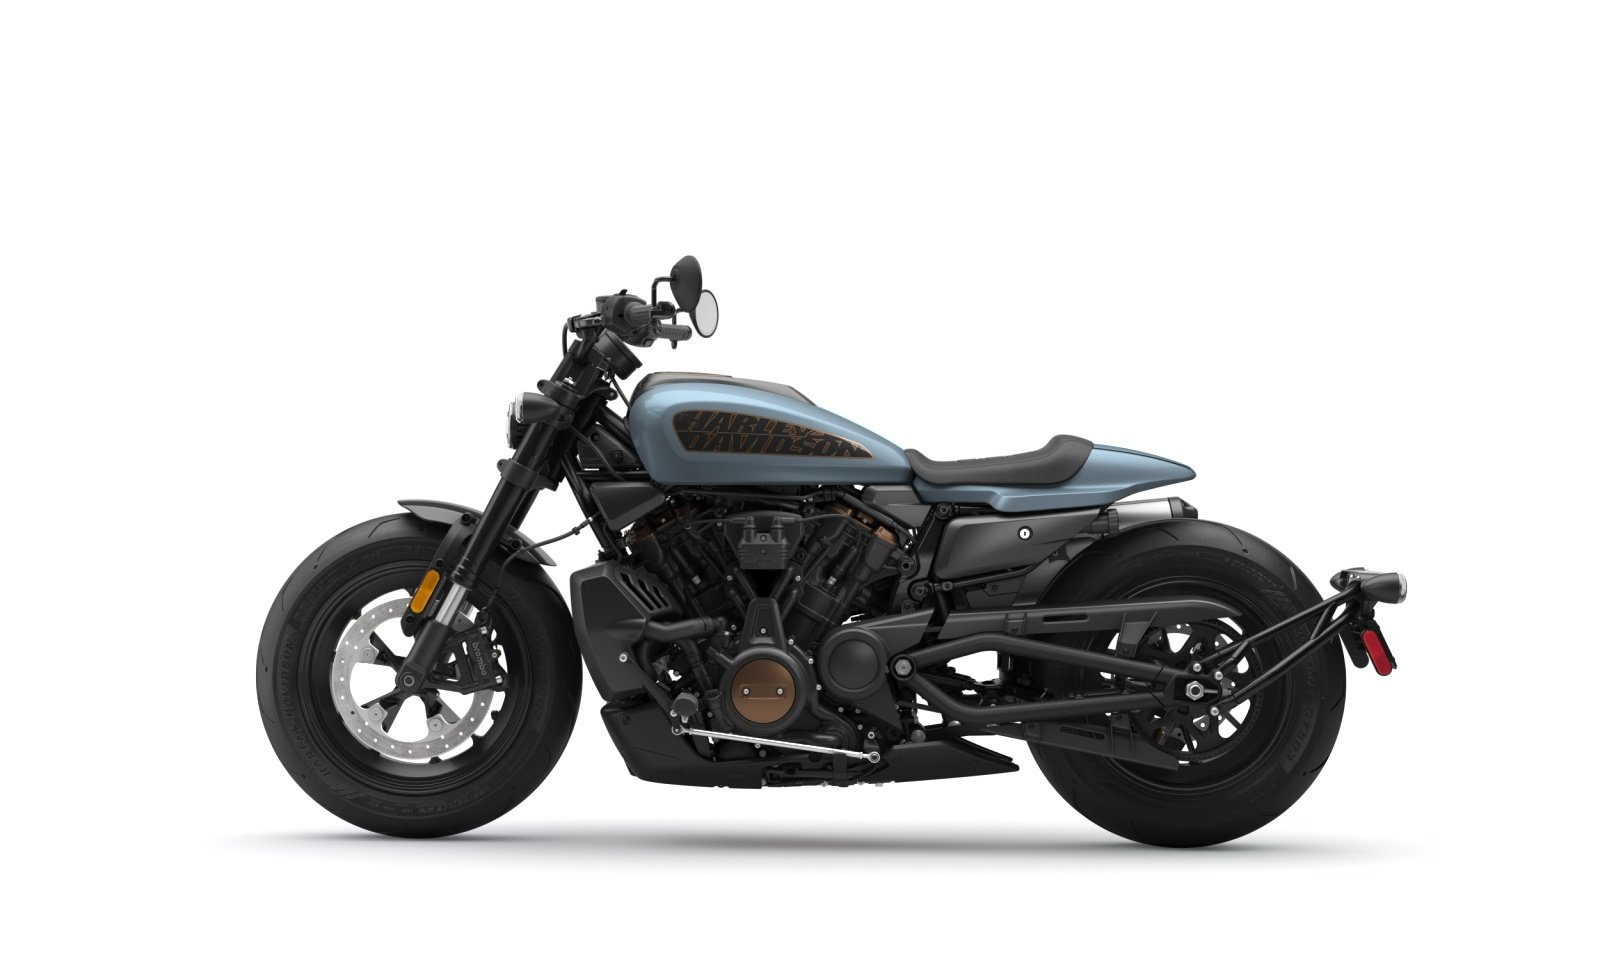 https://www.harley-davidson.com/content/dam/h-d/images/product-images/bikes/motorcycle/2024/2024-sportster-s/2024-sportster-s-m10b/360/2024-sportster-s-m10b-motorcycle-09.jpg?impolicy=myresize&rw=1600